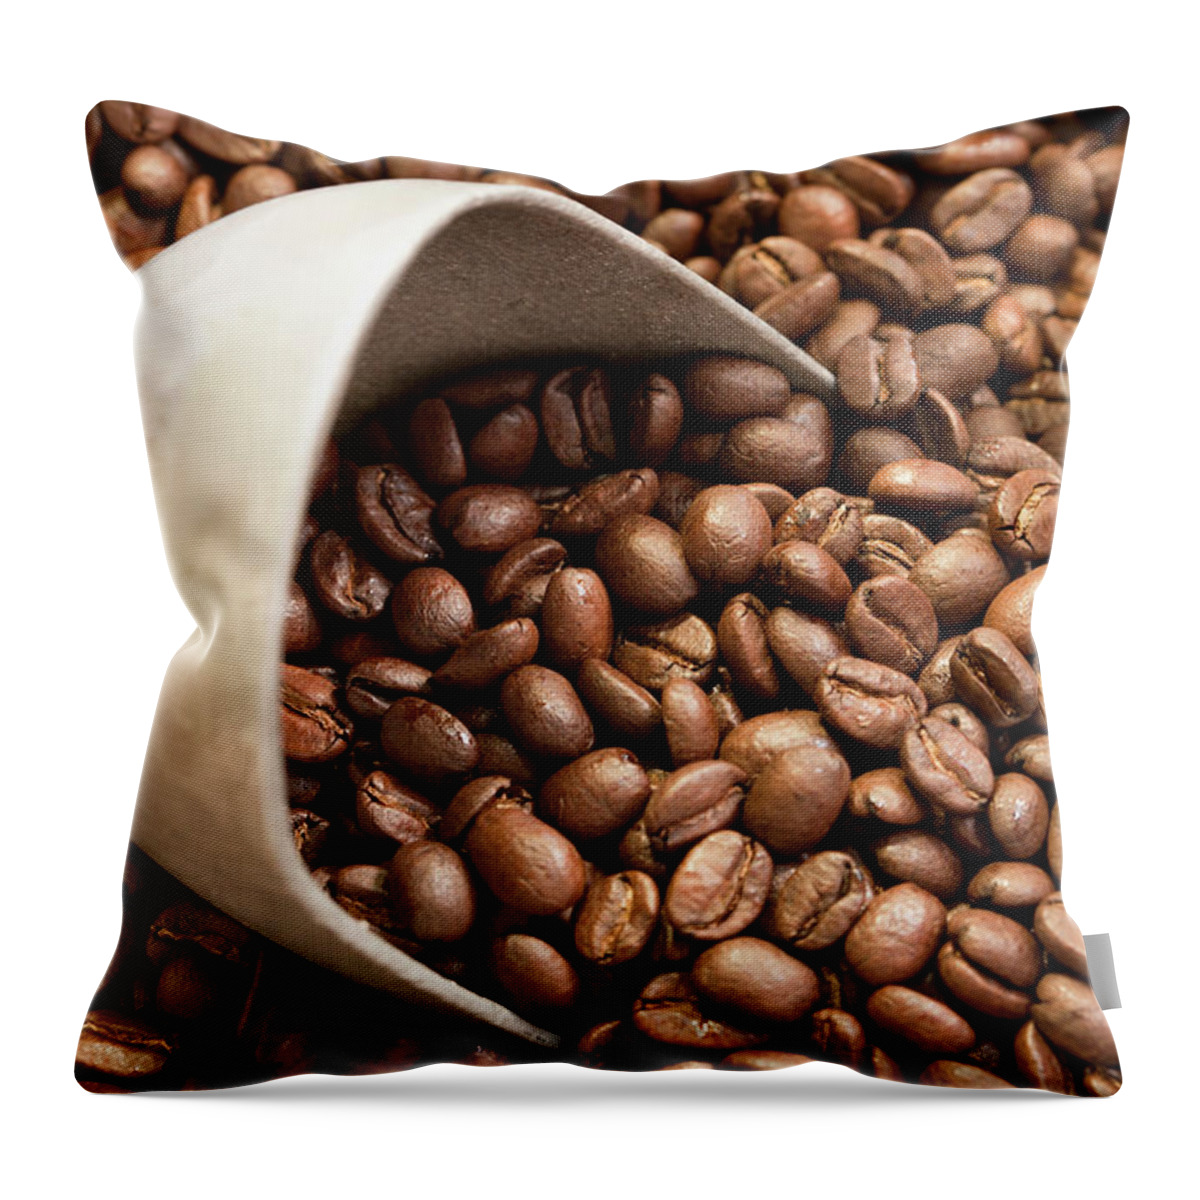 Handle Throw Pillow featuring the photograph Coffee Beans And Scoop by Stewart Waller